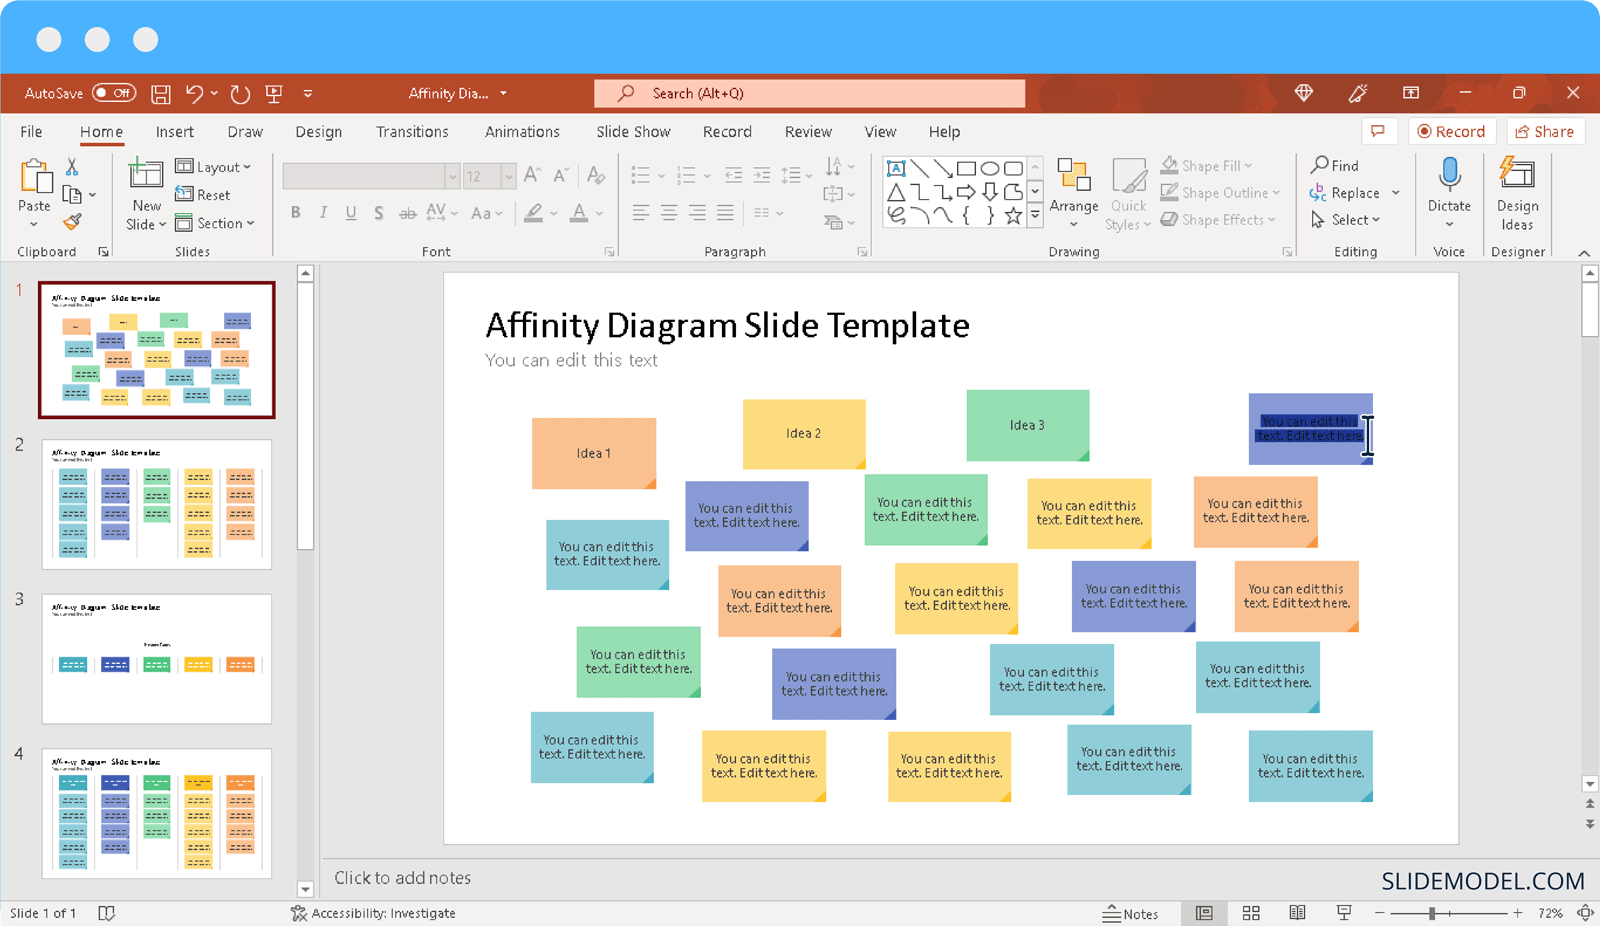 Affinity Diagram Slide Template for PowerPoint Presentations